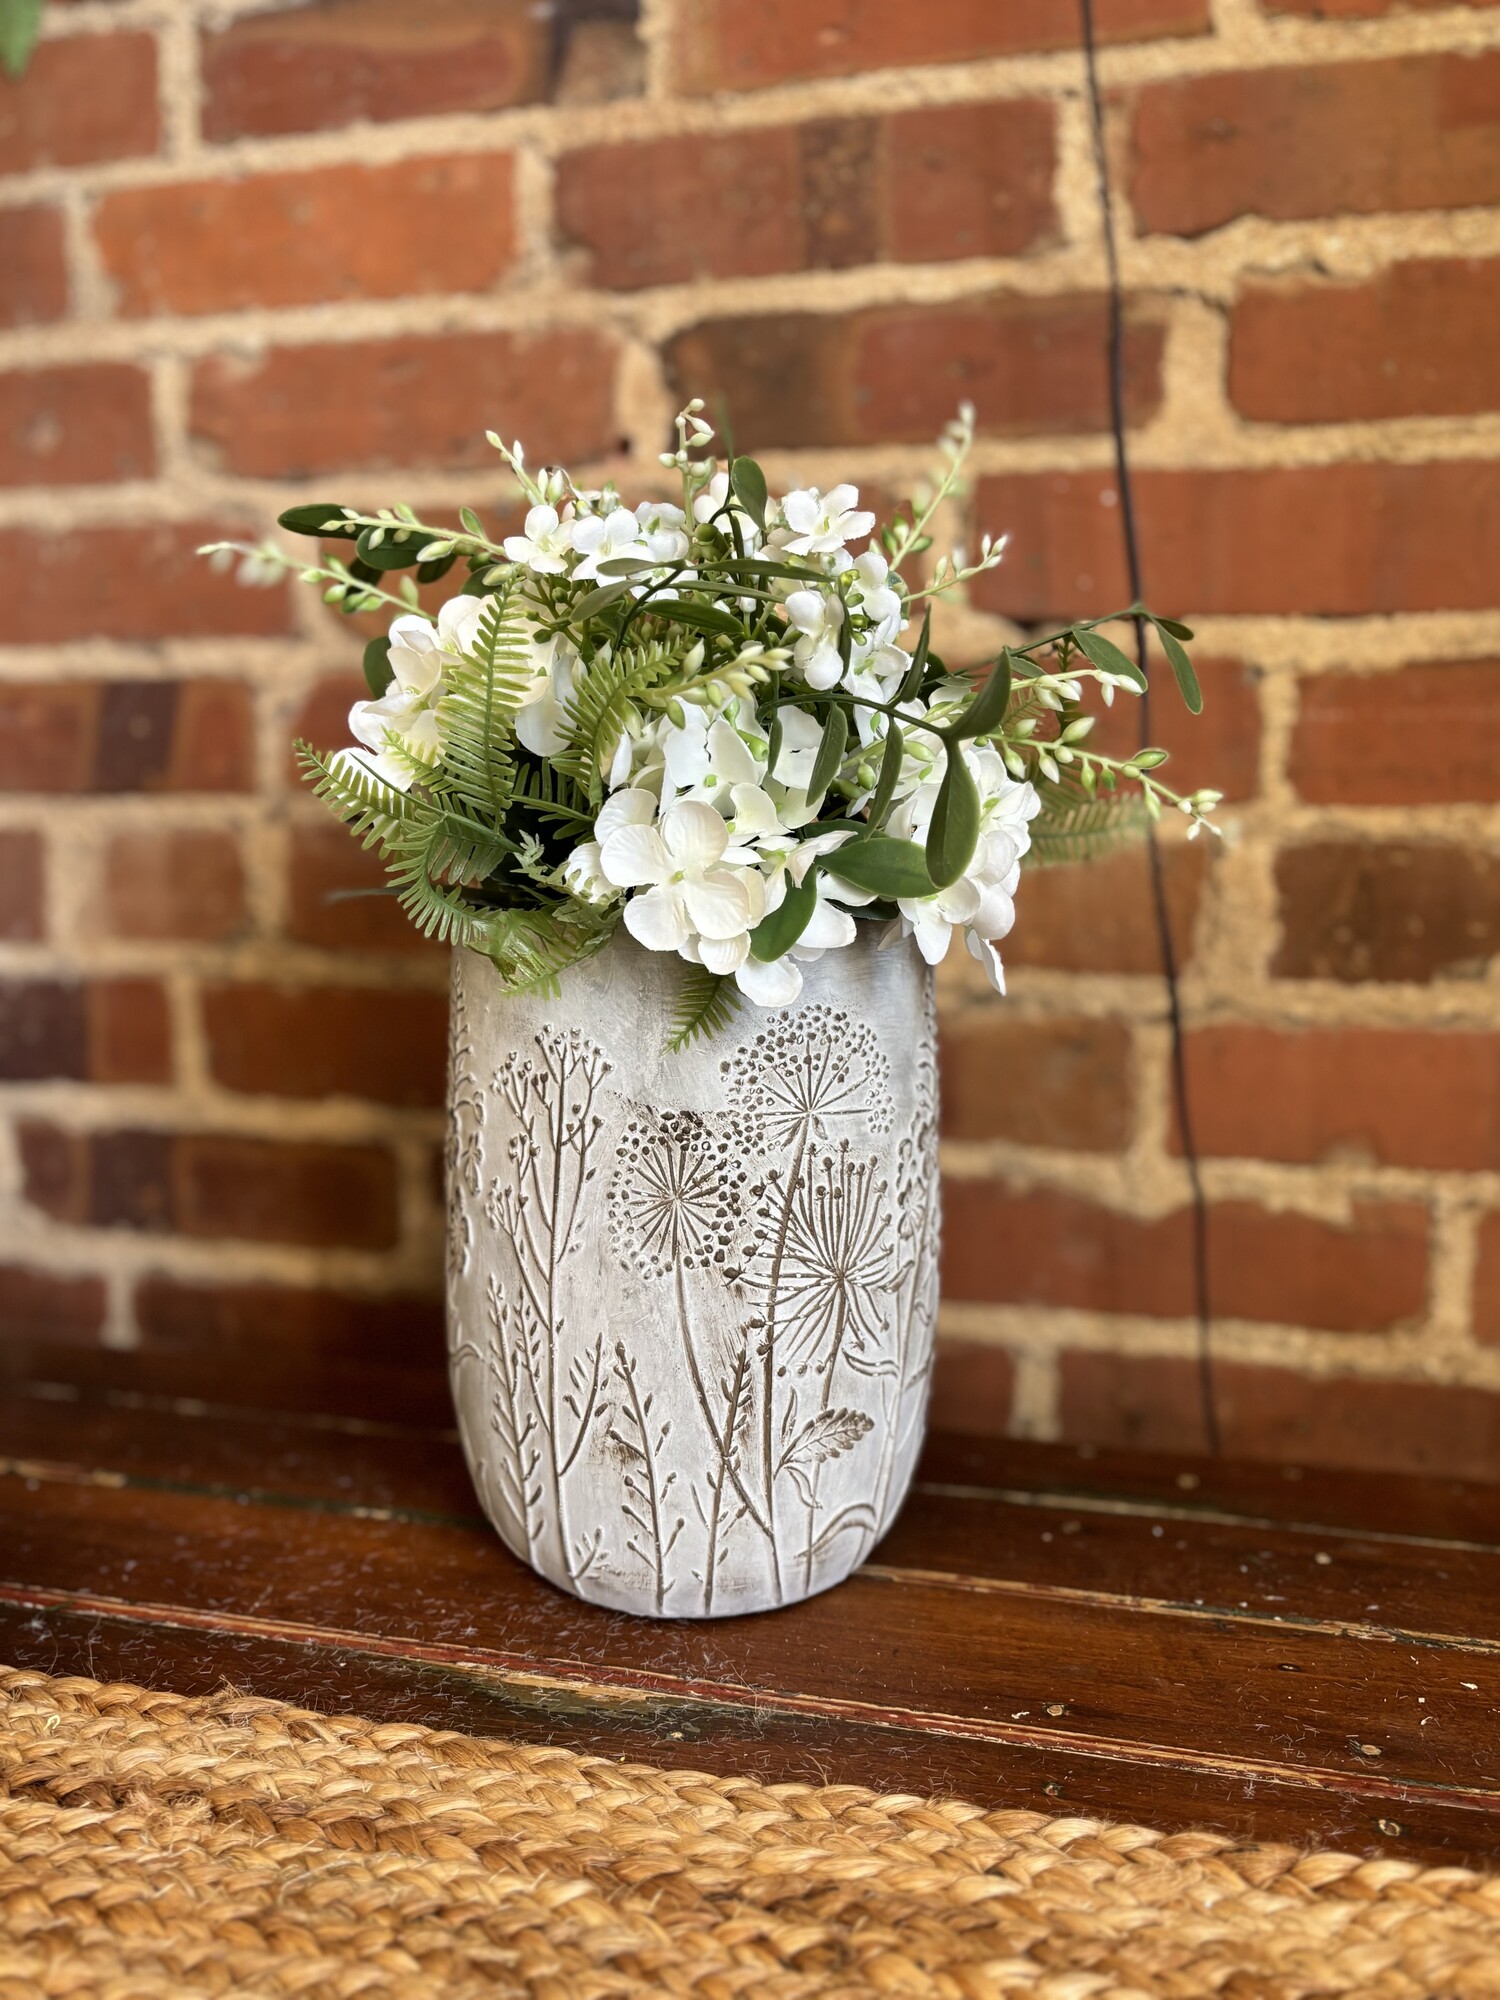 This pretty cement pot has raised lightly painted leaves, flowers and dandelions
This pot is perfect  for any color floral for a touch of spring to your home
Pot measures 8 inches tall, 6 inches width and 7 and a half inches deep